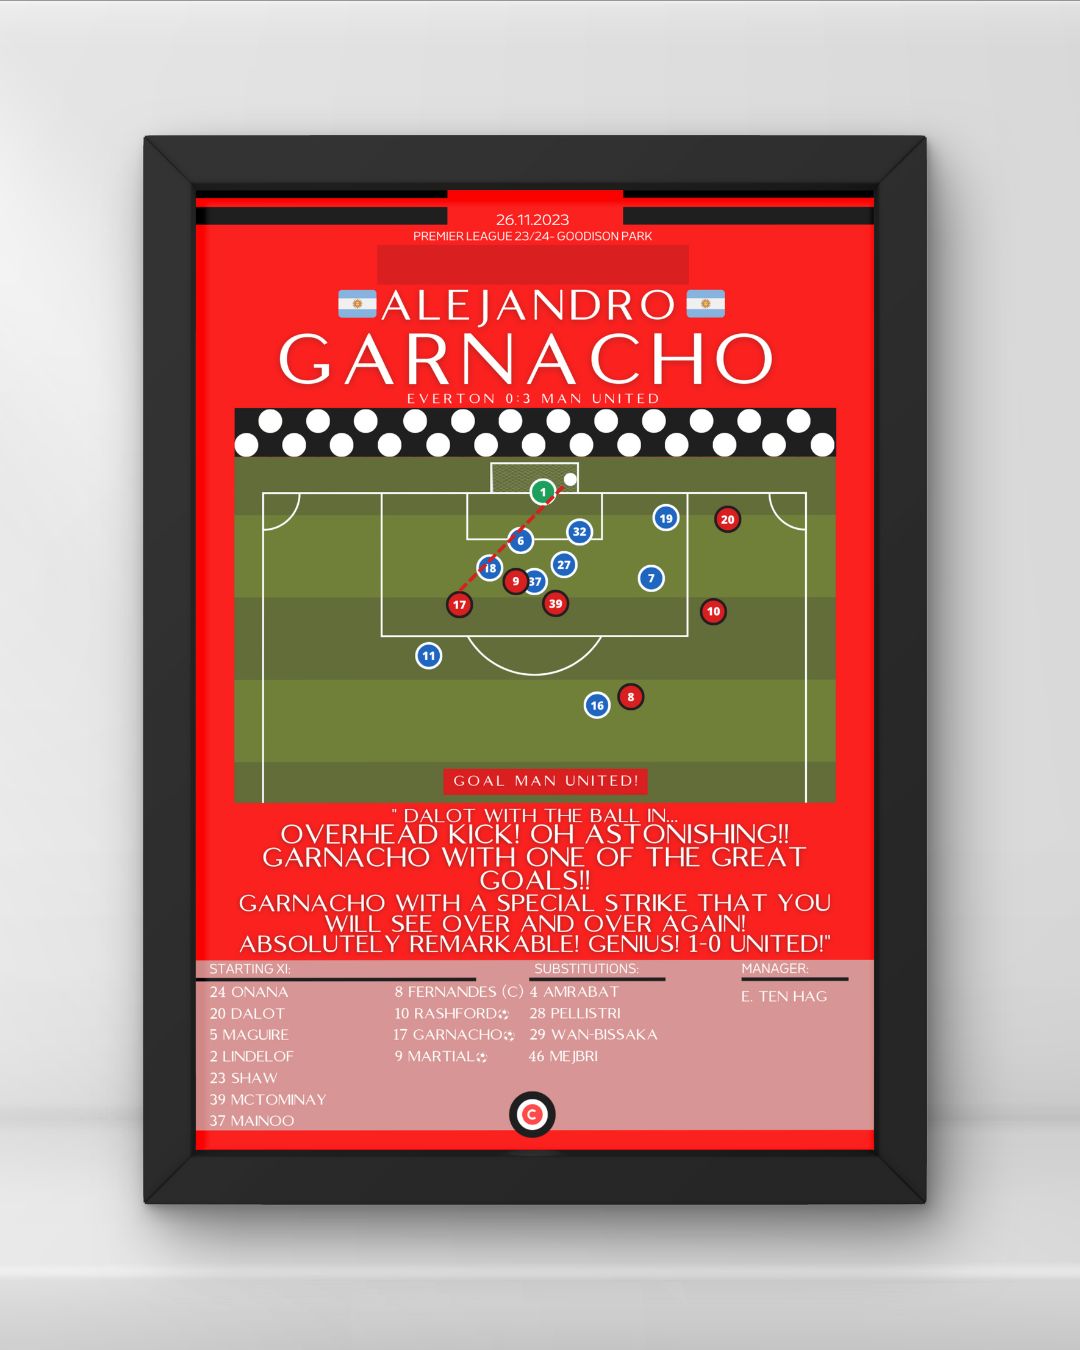 Football Print with frame of Alejandro Garnacho bicycle kick goal against Everton in the Premier League